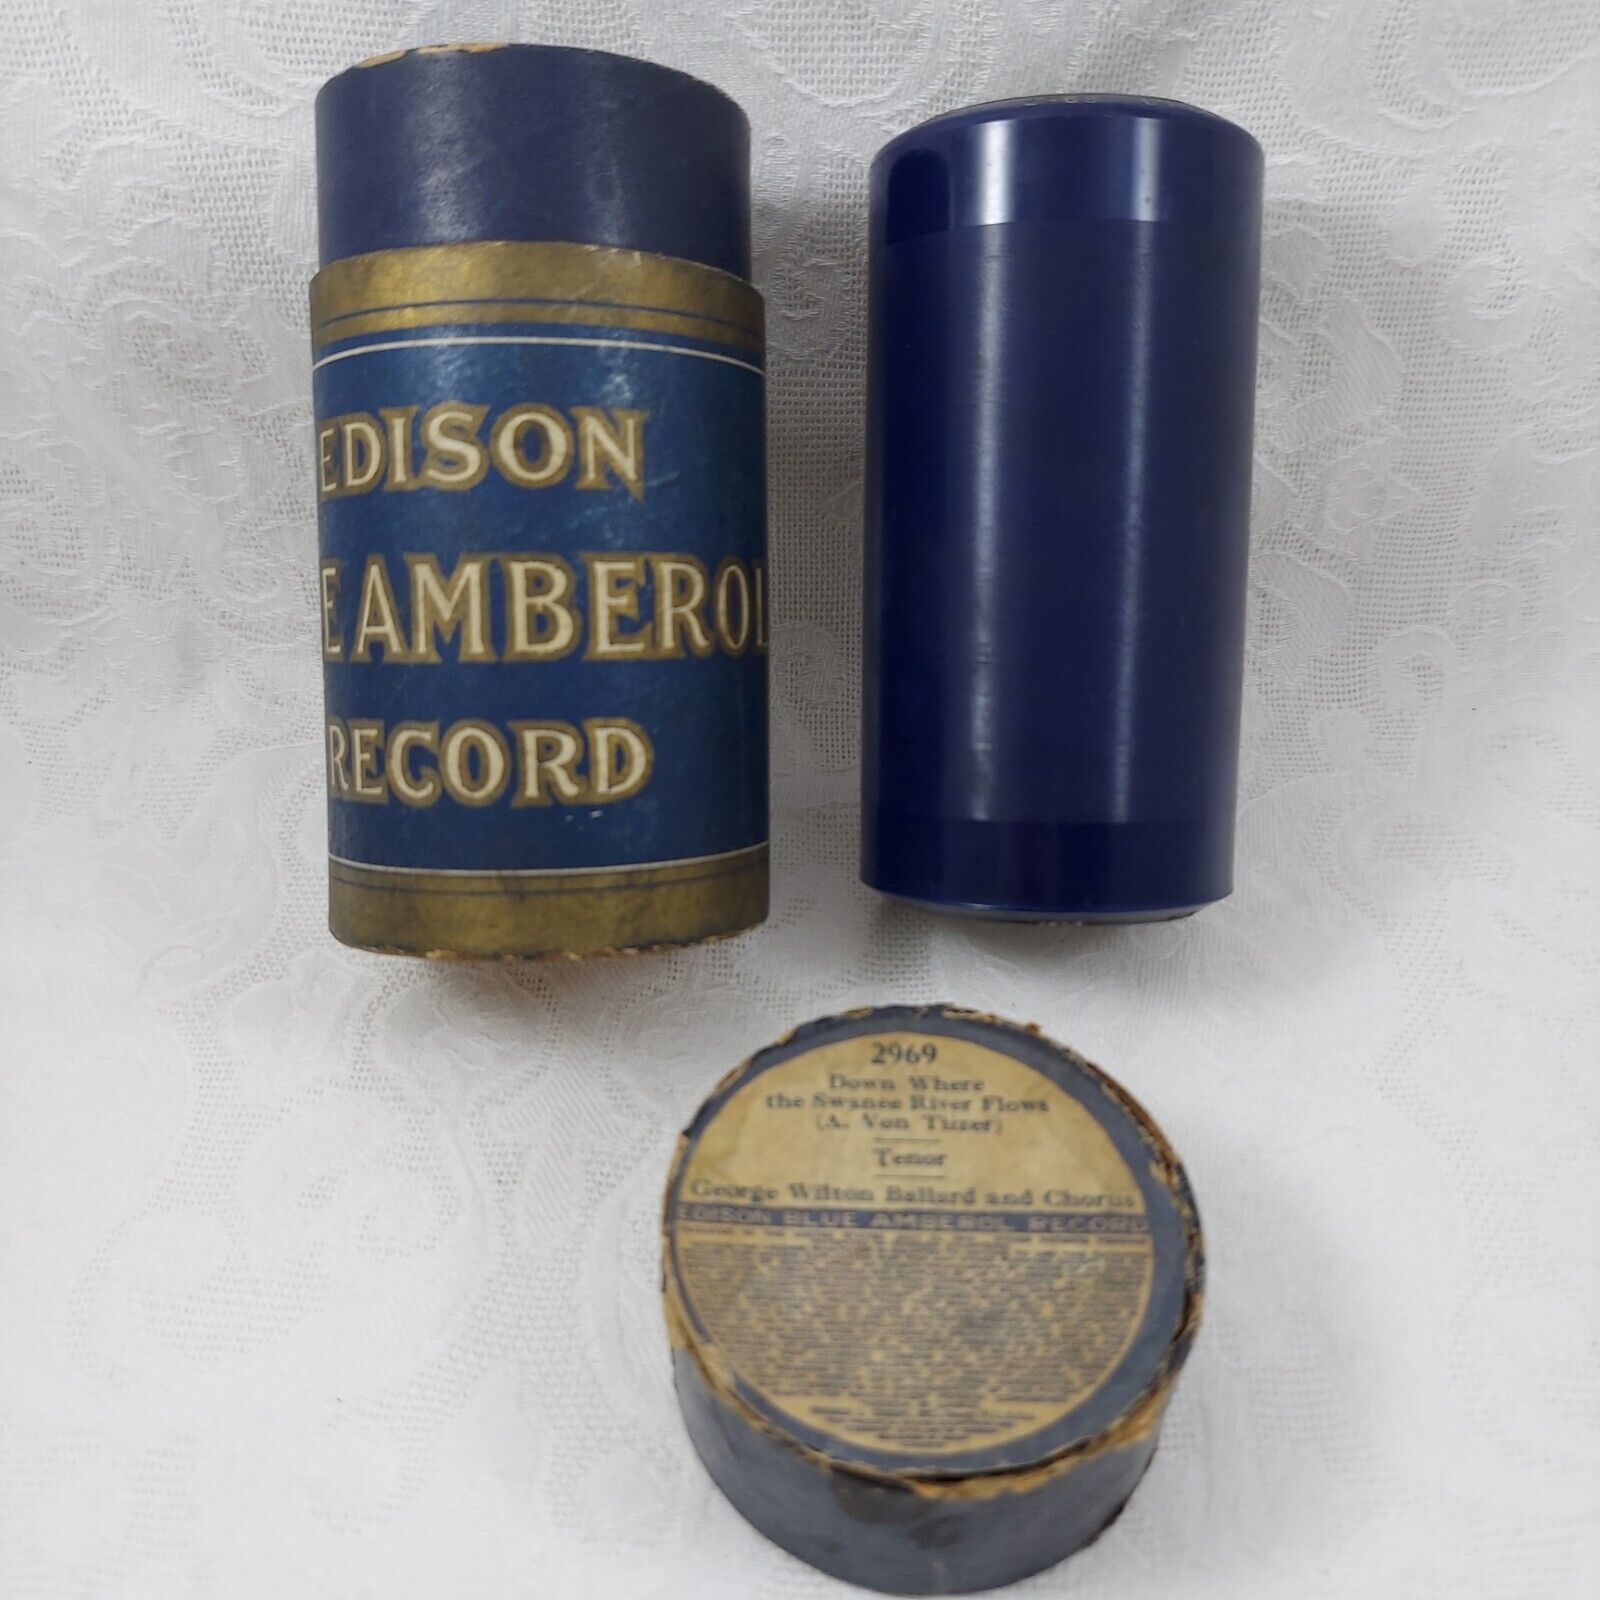 Edison Blue Amberol Cylinder Record 2969 'down Where The Swanee River Flows'